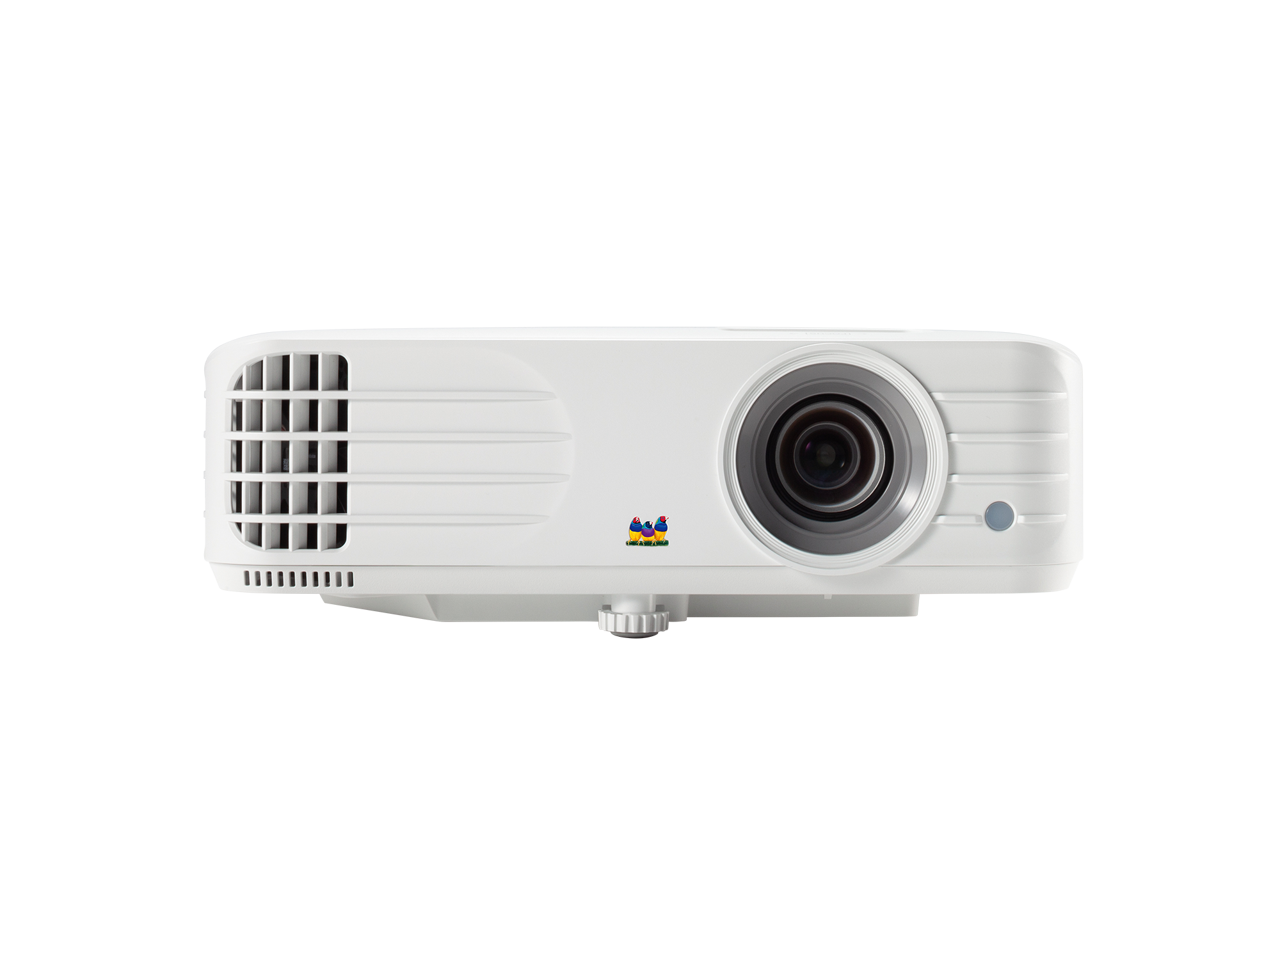 ViewSonic PG701WU 3500 Lumens WUXGA Projector with Vertical Keystone Dual 3D Ready HDMI Inputs and Low Input Latency for Home and Office